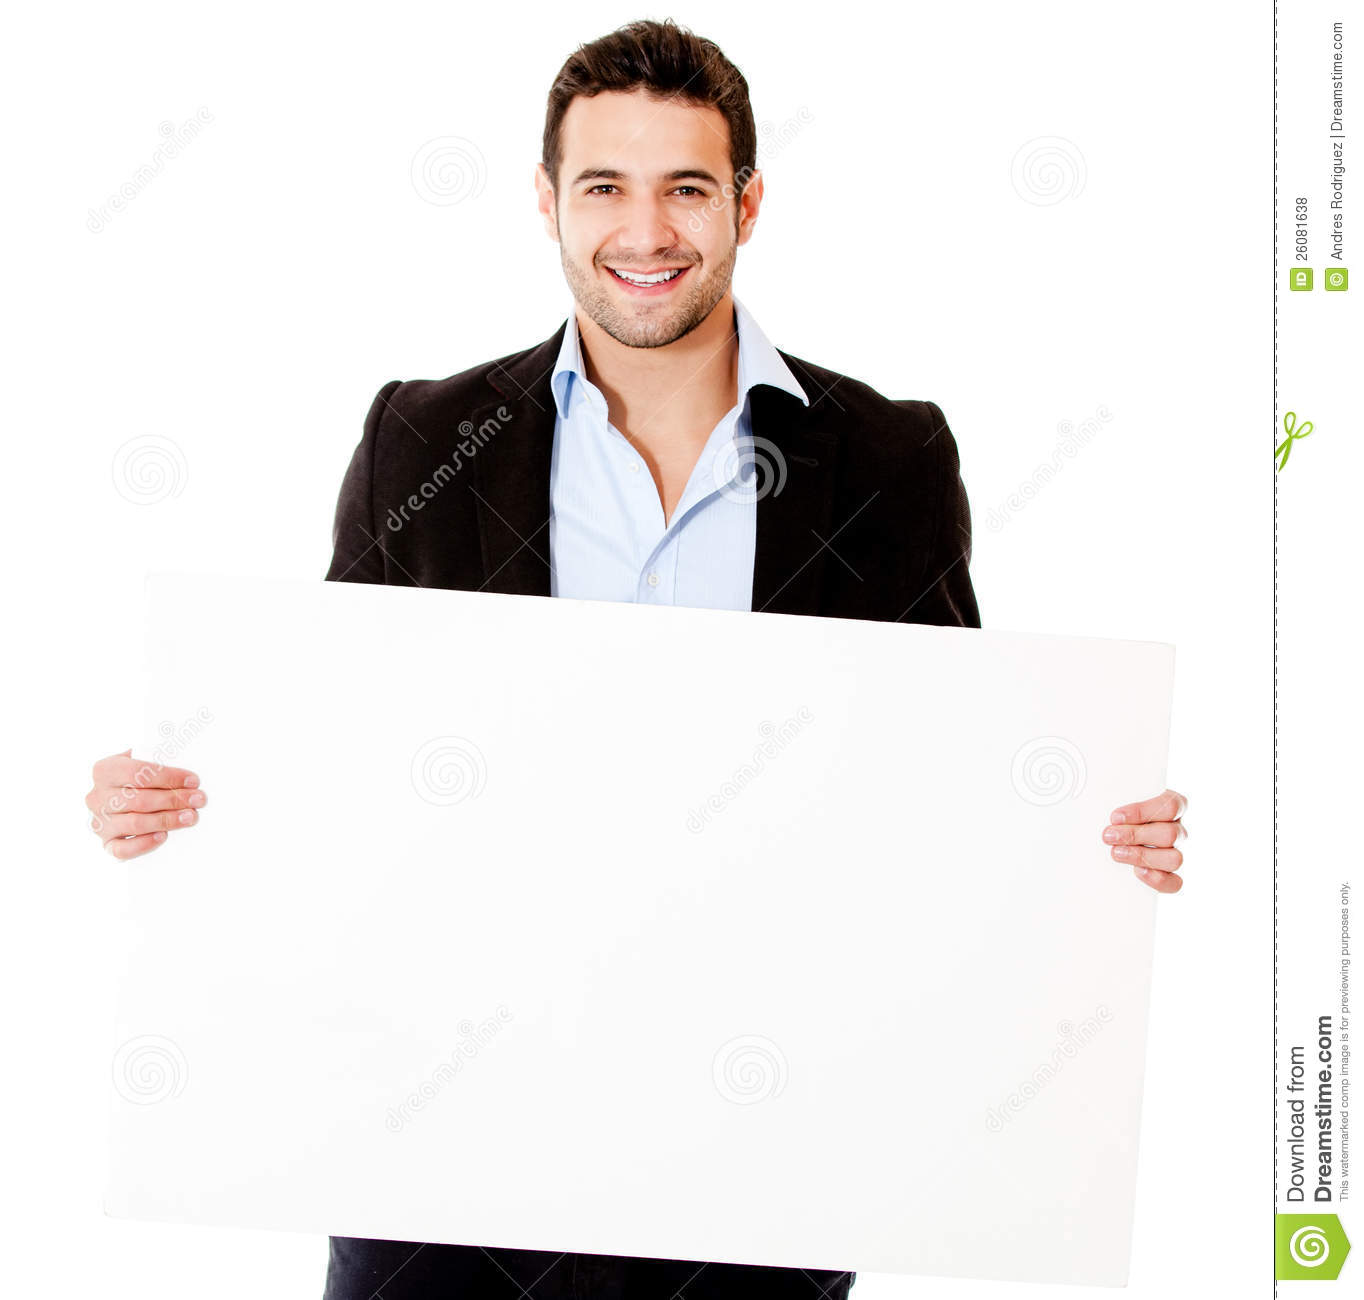 Casual Business Man With A Banner Royalty Free Stock Photos   Image